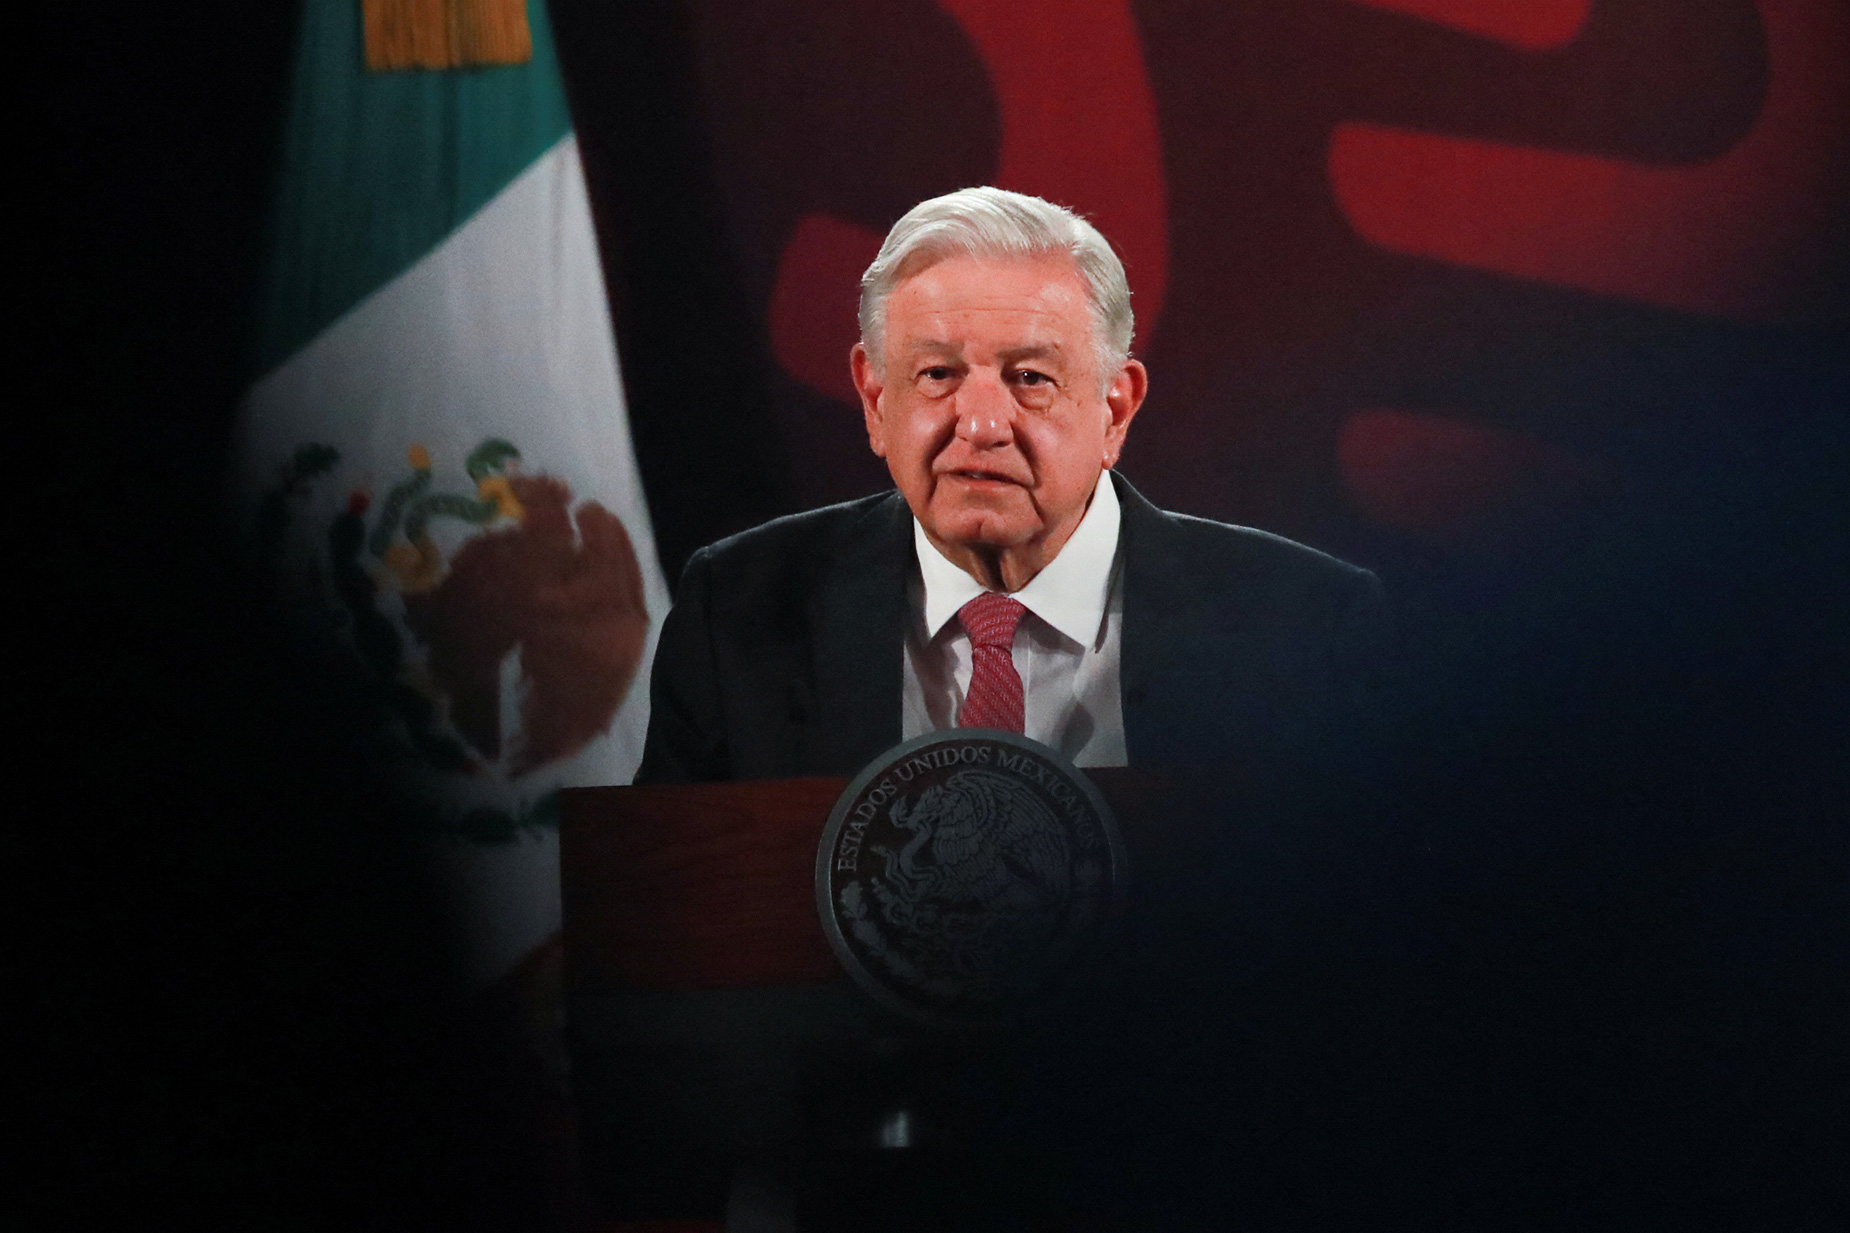 Mexico's President Andrés Manuel López Obrador attends a press conference after the general election in Mexico City, on June 3.